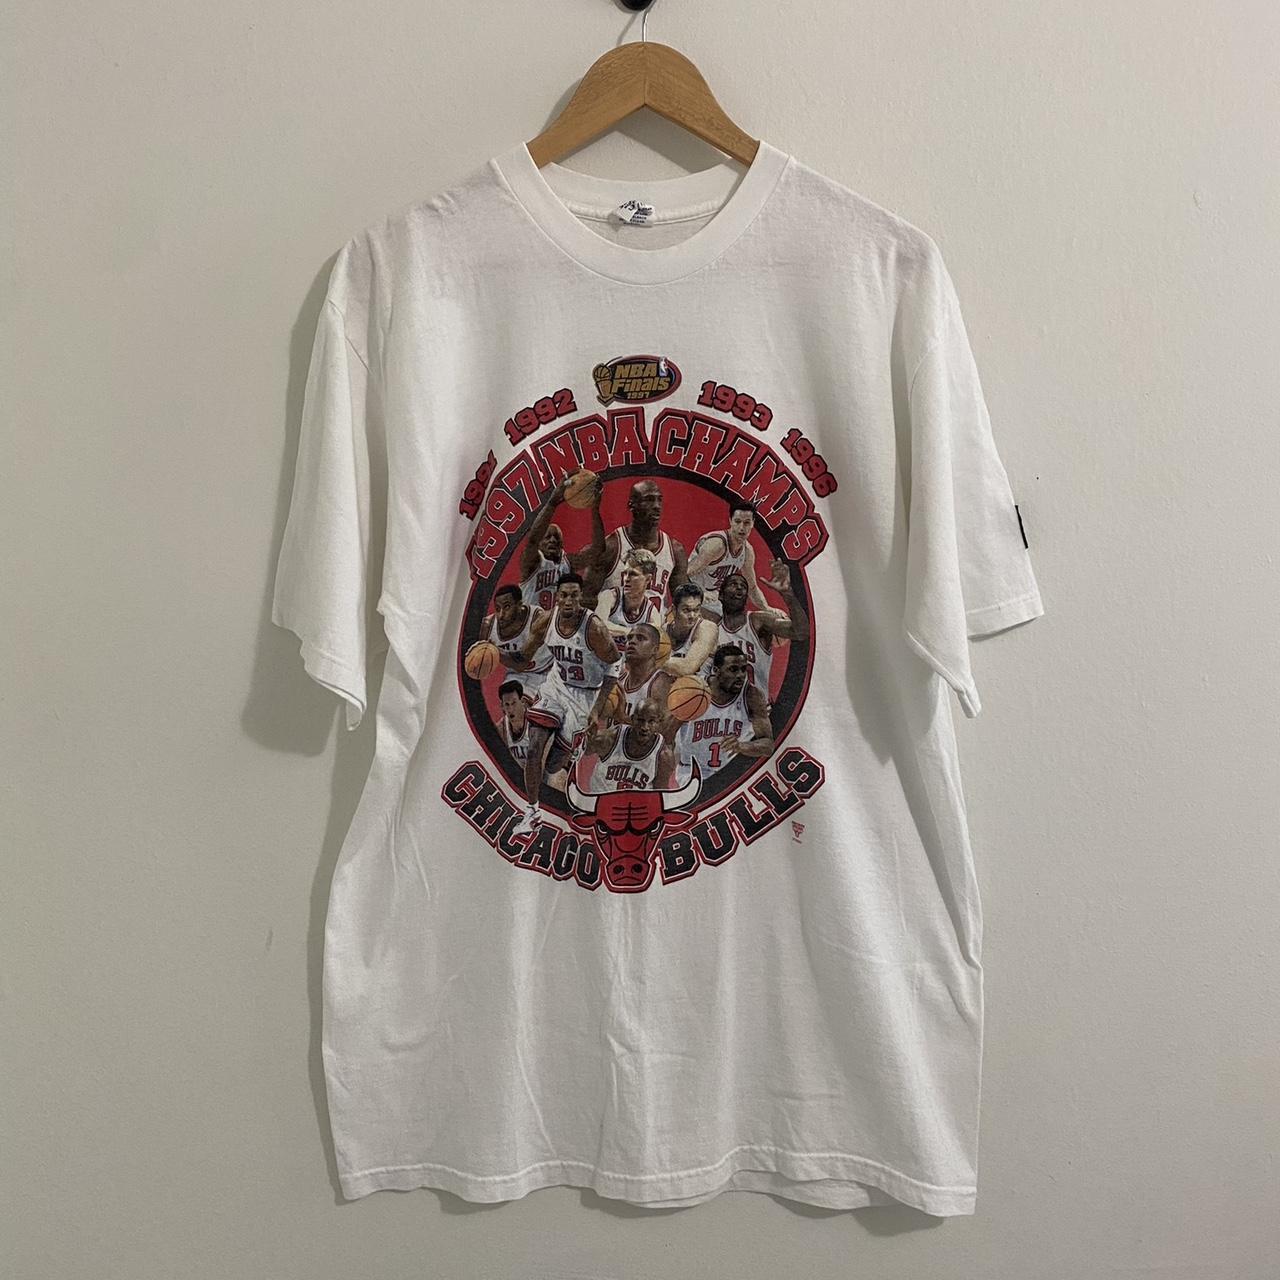 Vintage 1996 Chicago Bulls Shirt. The shirt is in - Depop